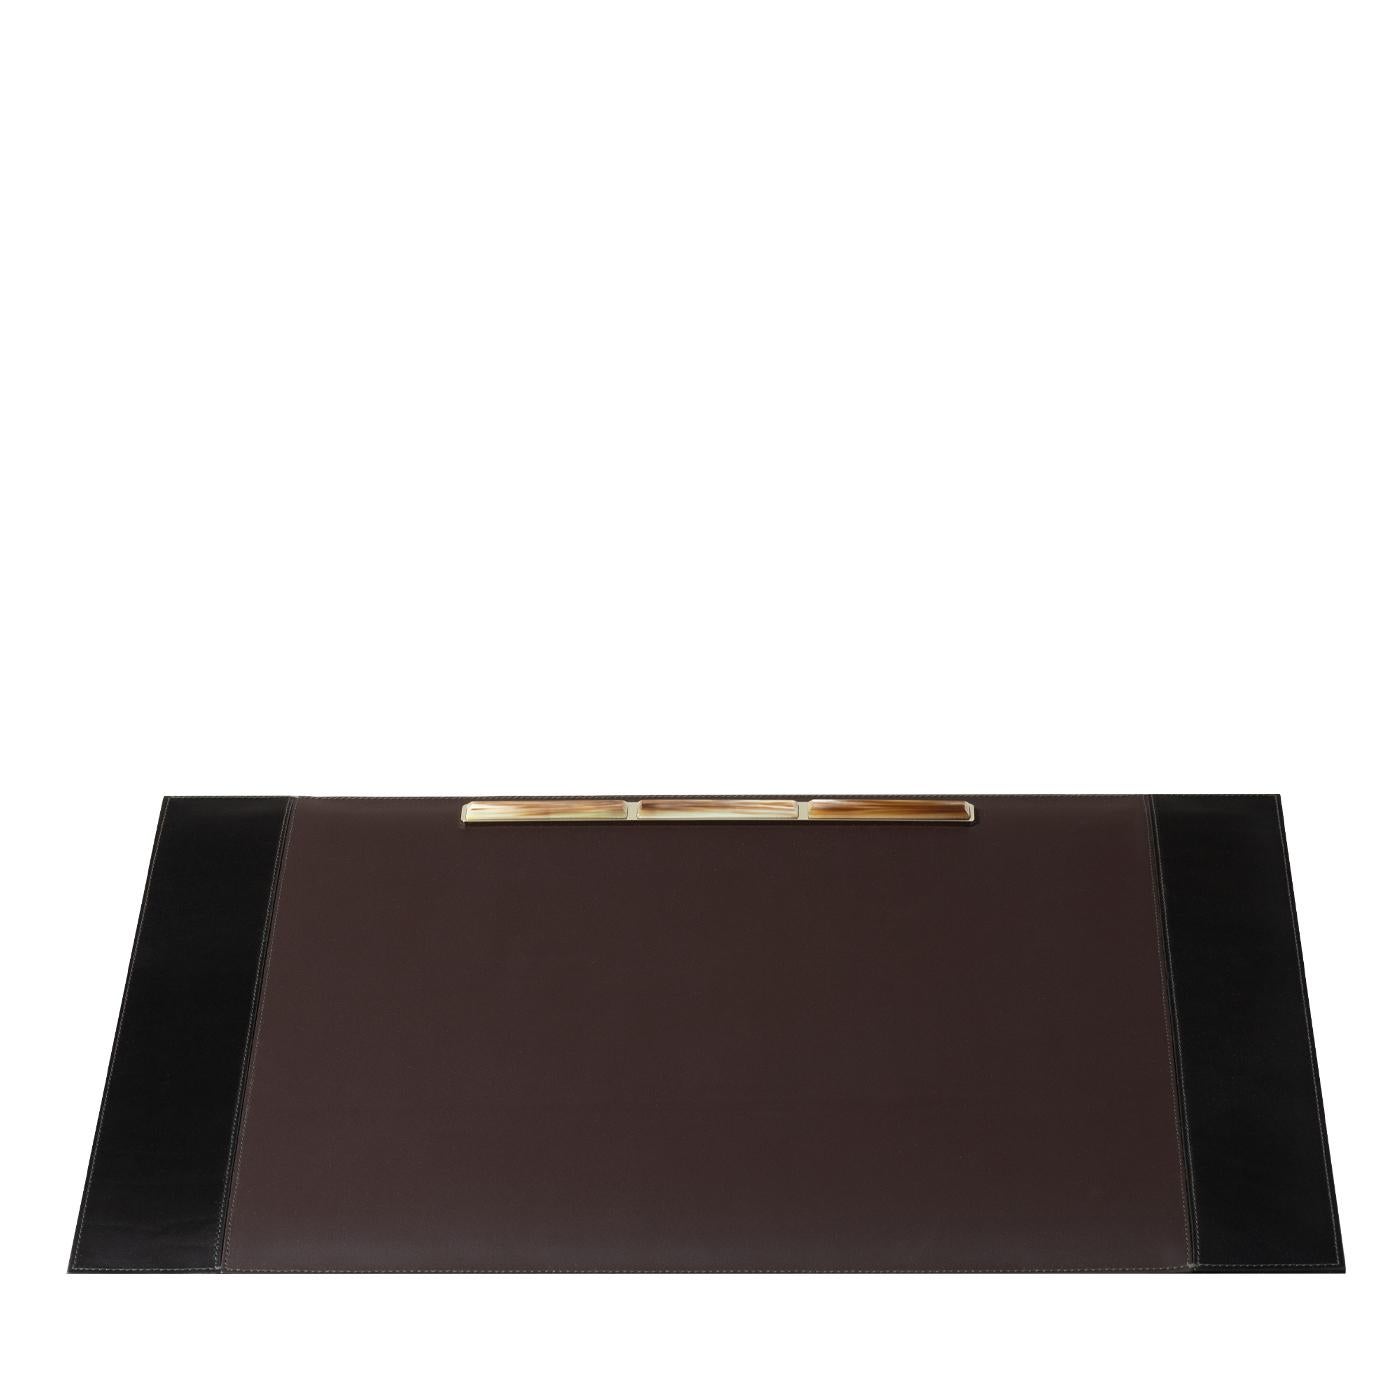 Sophisticated and timeless, this elegant leather pad combines precious materials and traditional craftsmanship, adding a stunning accent to a study or office desk. Its simple brown leather surface is adorned with a piece of natural horn at the top